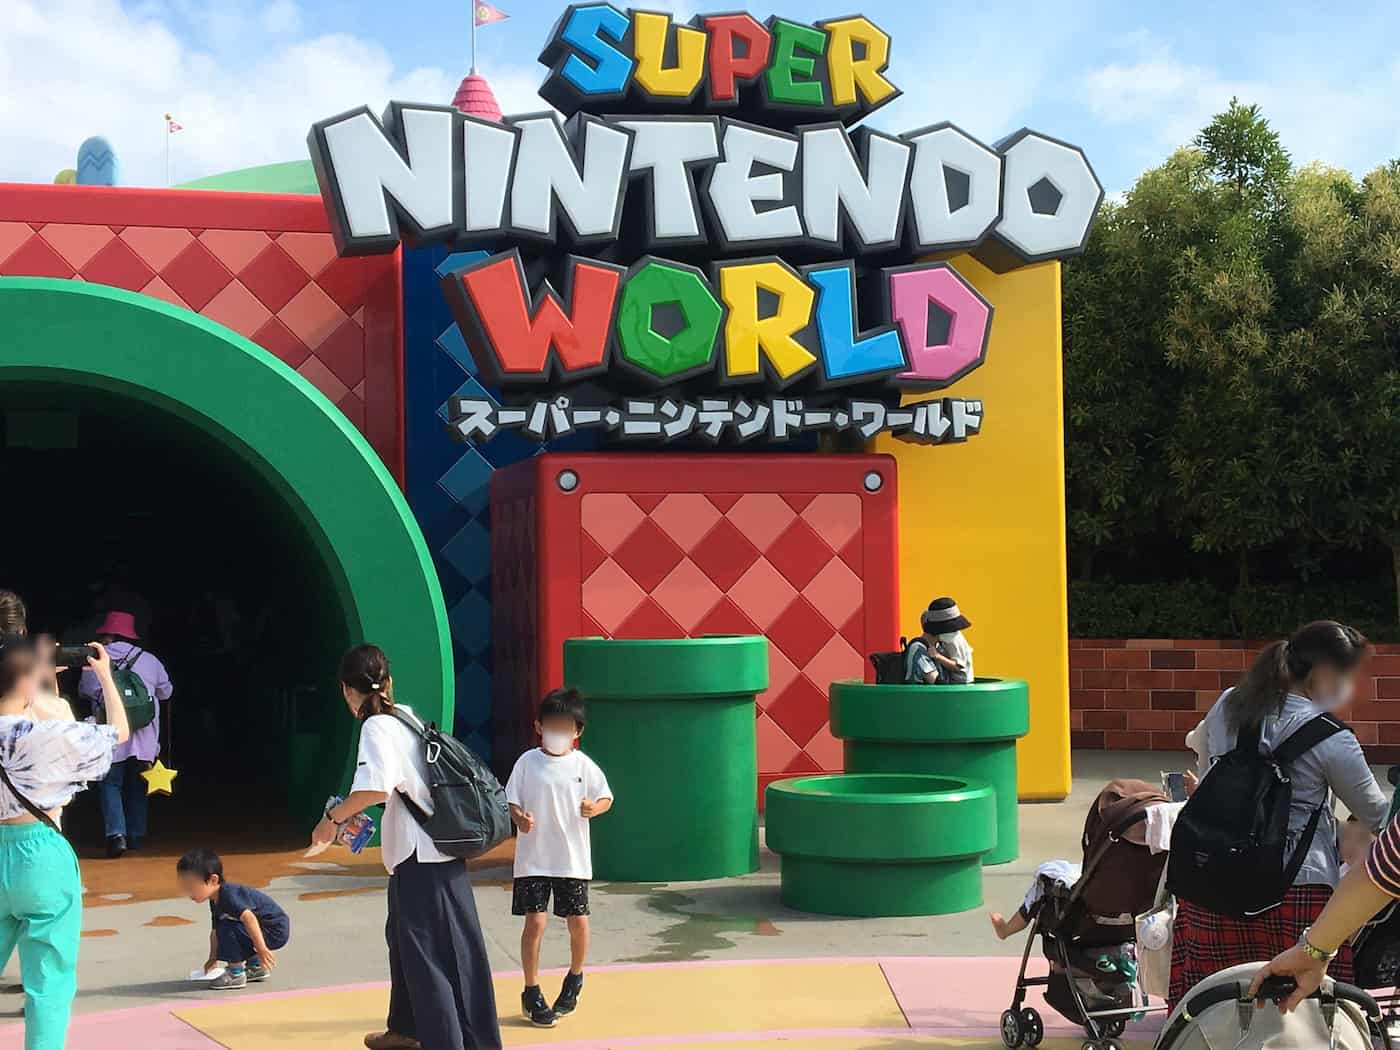 Vibrant and colorful entrance to Super Nintendo World at Universal Studios Japan, featuring iconic Super Mario-themed decorations and architecture.